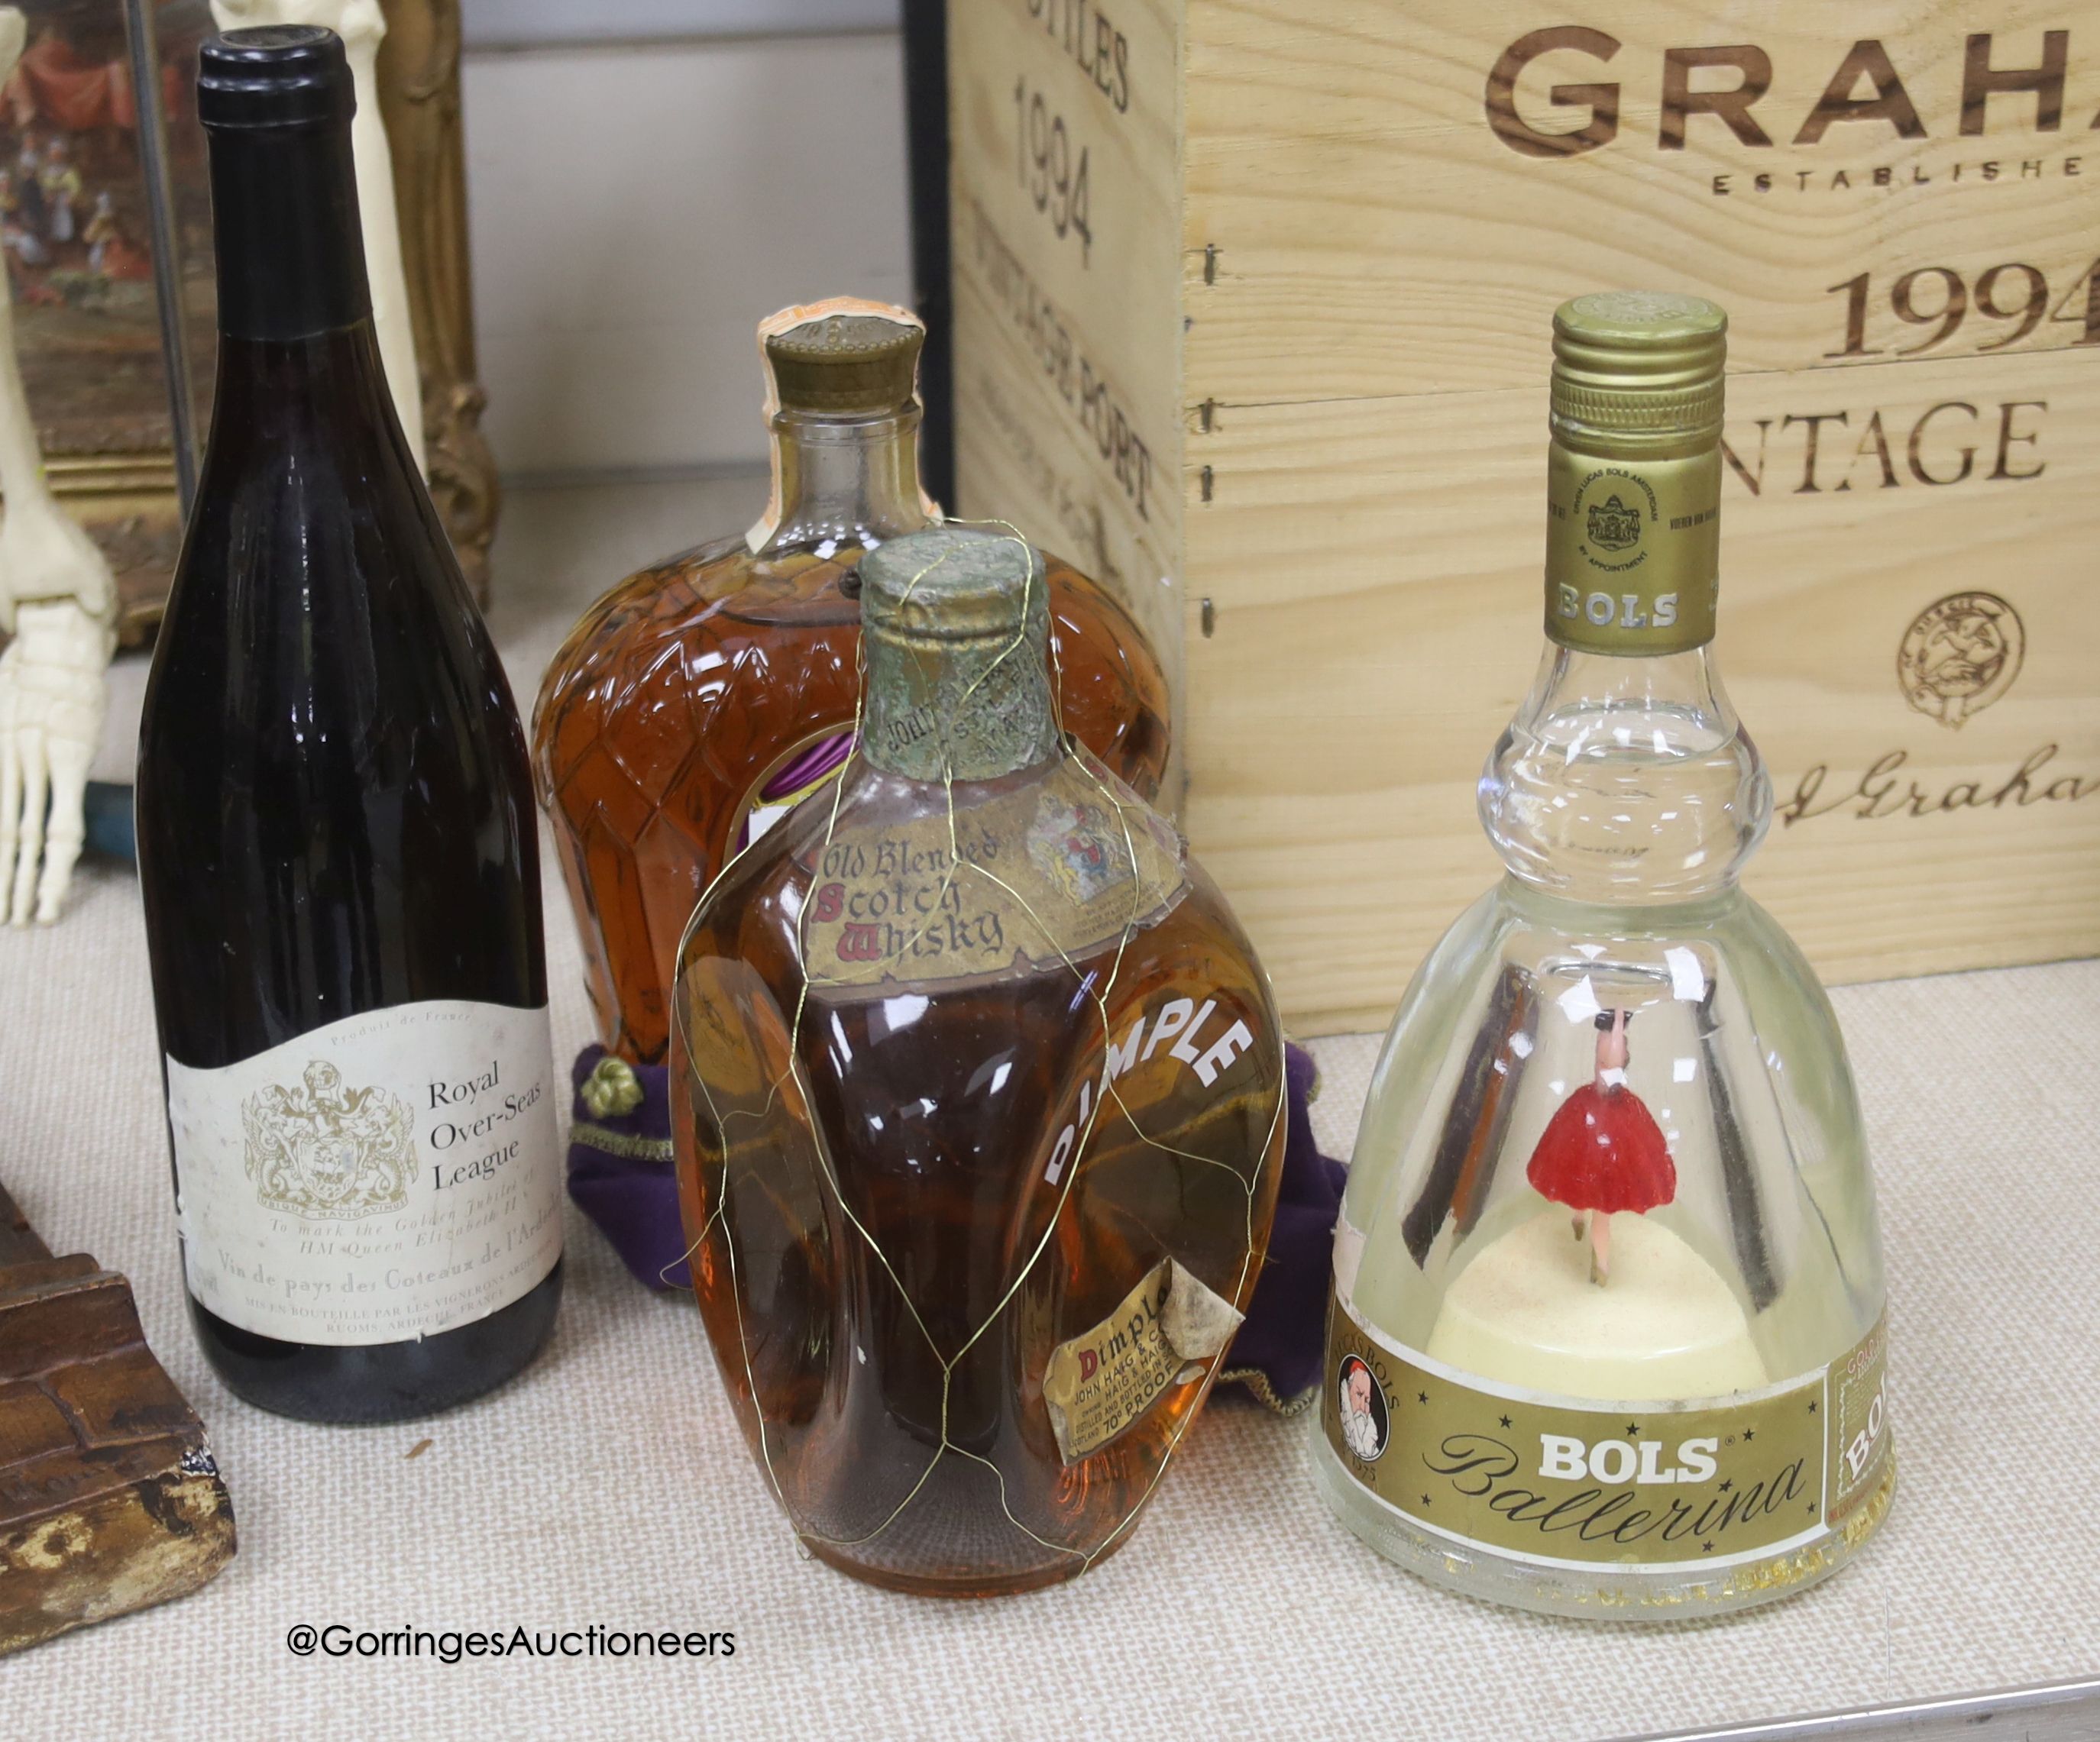 One bottle of Haig Dimple Scotch Whisky, one Crown Royal Canadian Whisky, one Bols Ballerina and one Royal Over-seas (egue vin de pays wine)